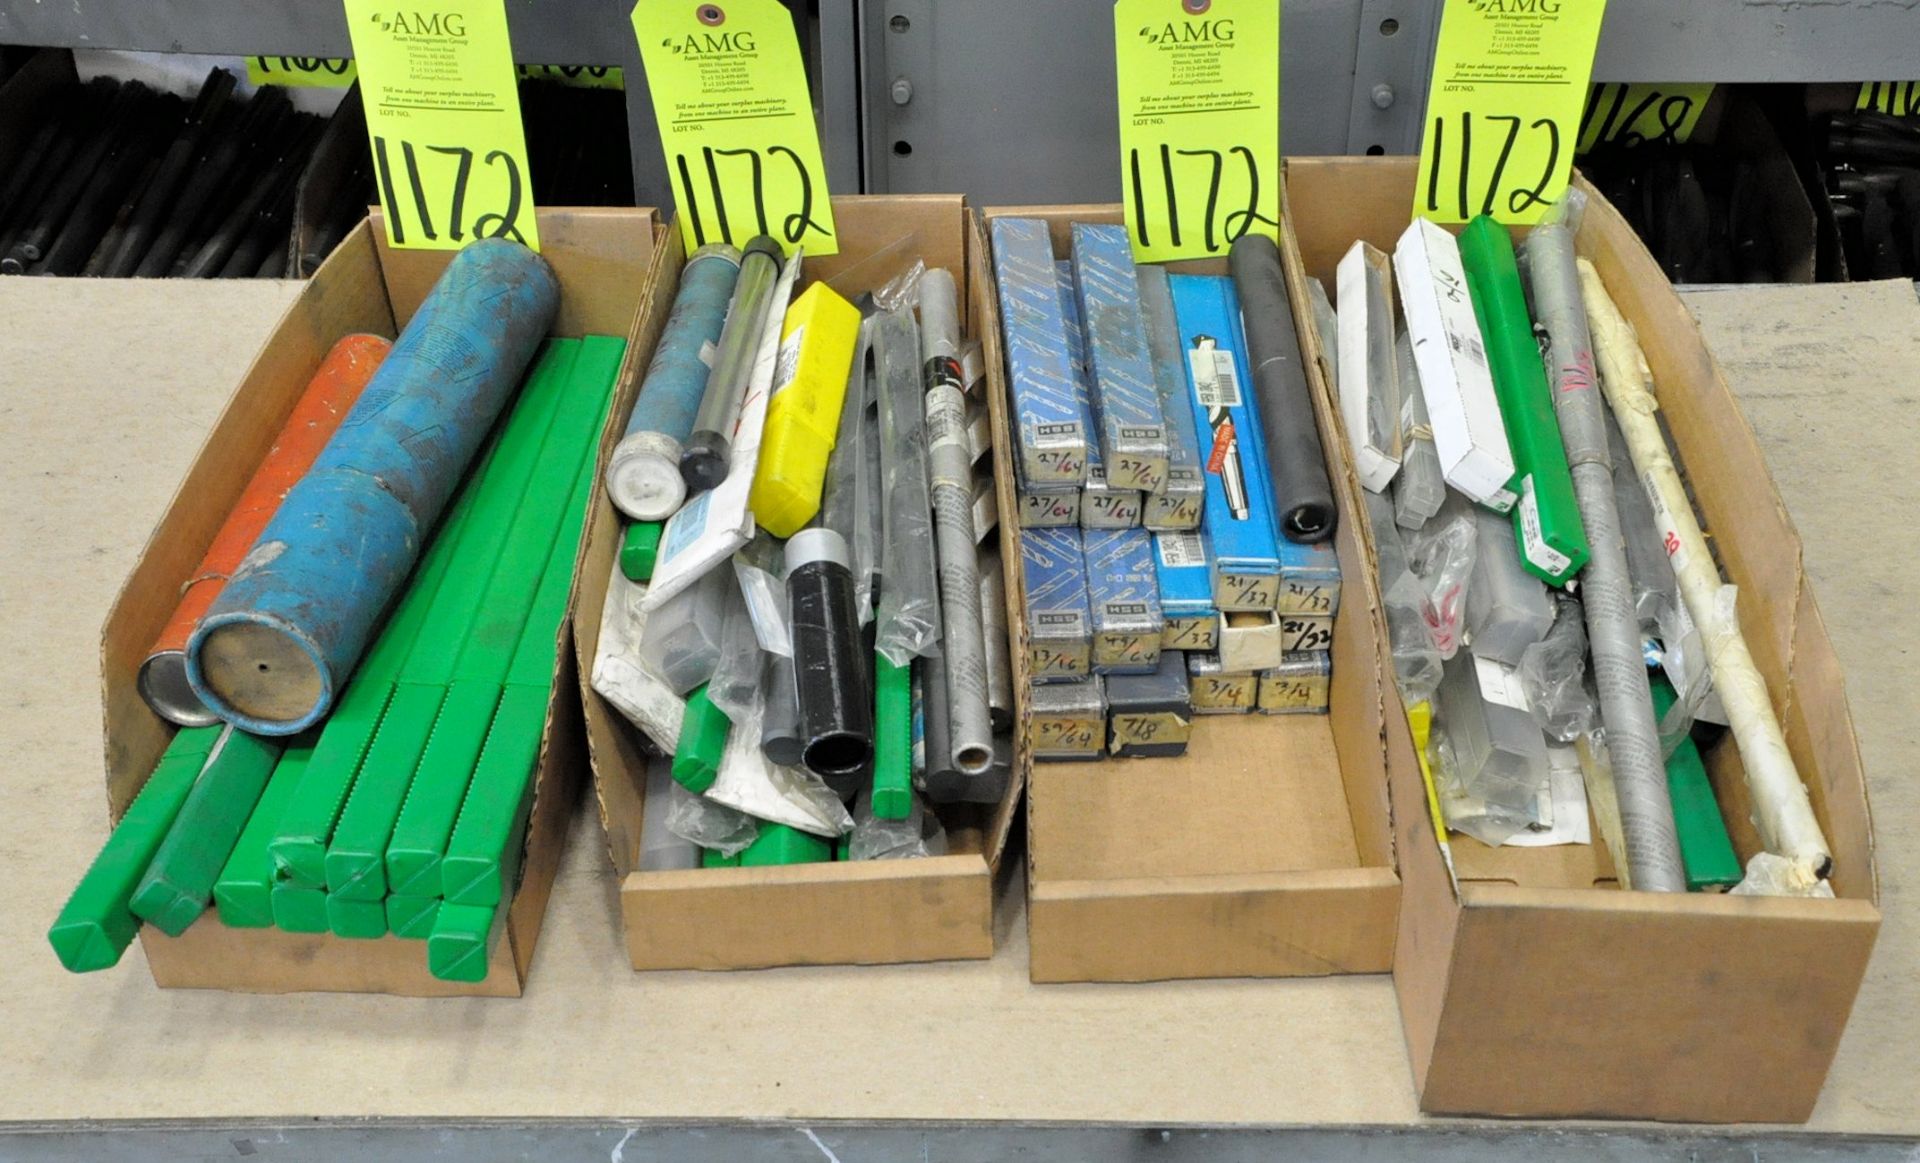 Lot-Packaged Cutters in (4) Boxes on (1) Shelf, (F-14), (Yellow Tag)